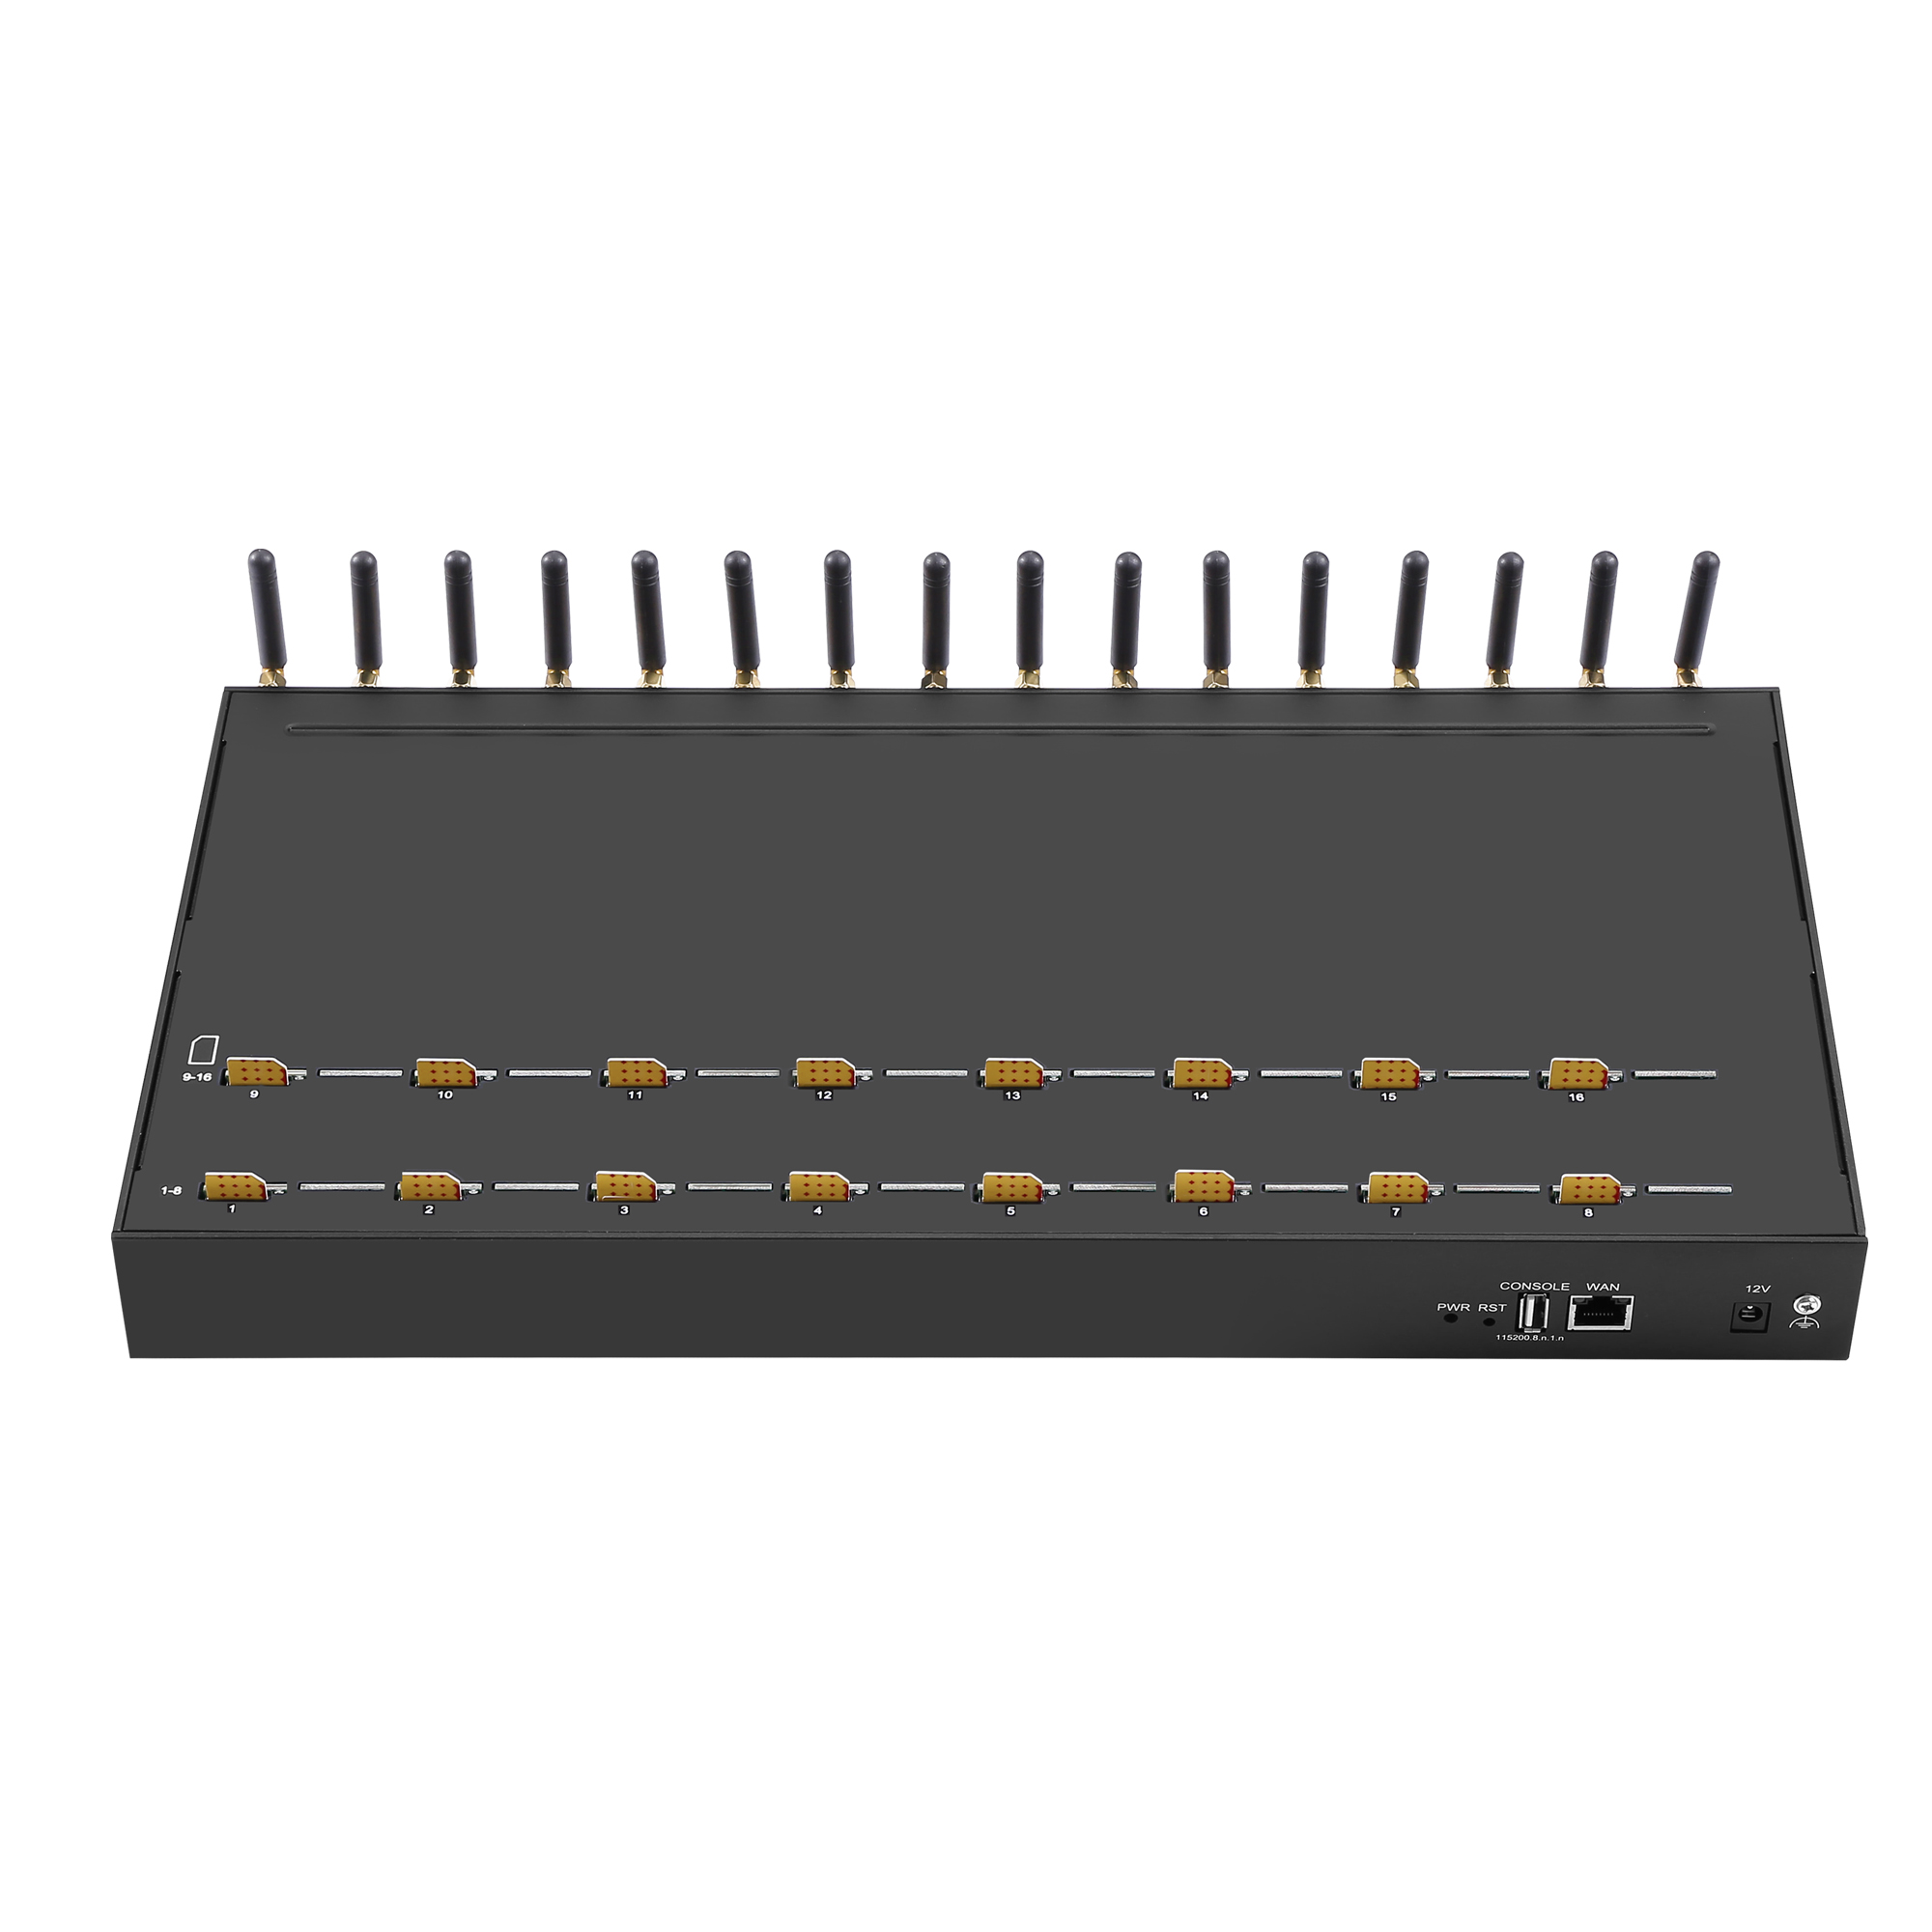 16 Ports VOIP Gateway Equipment Support  SIM Card for Call Termination